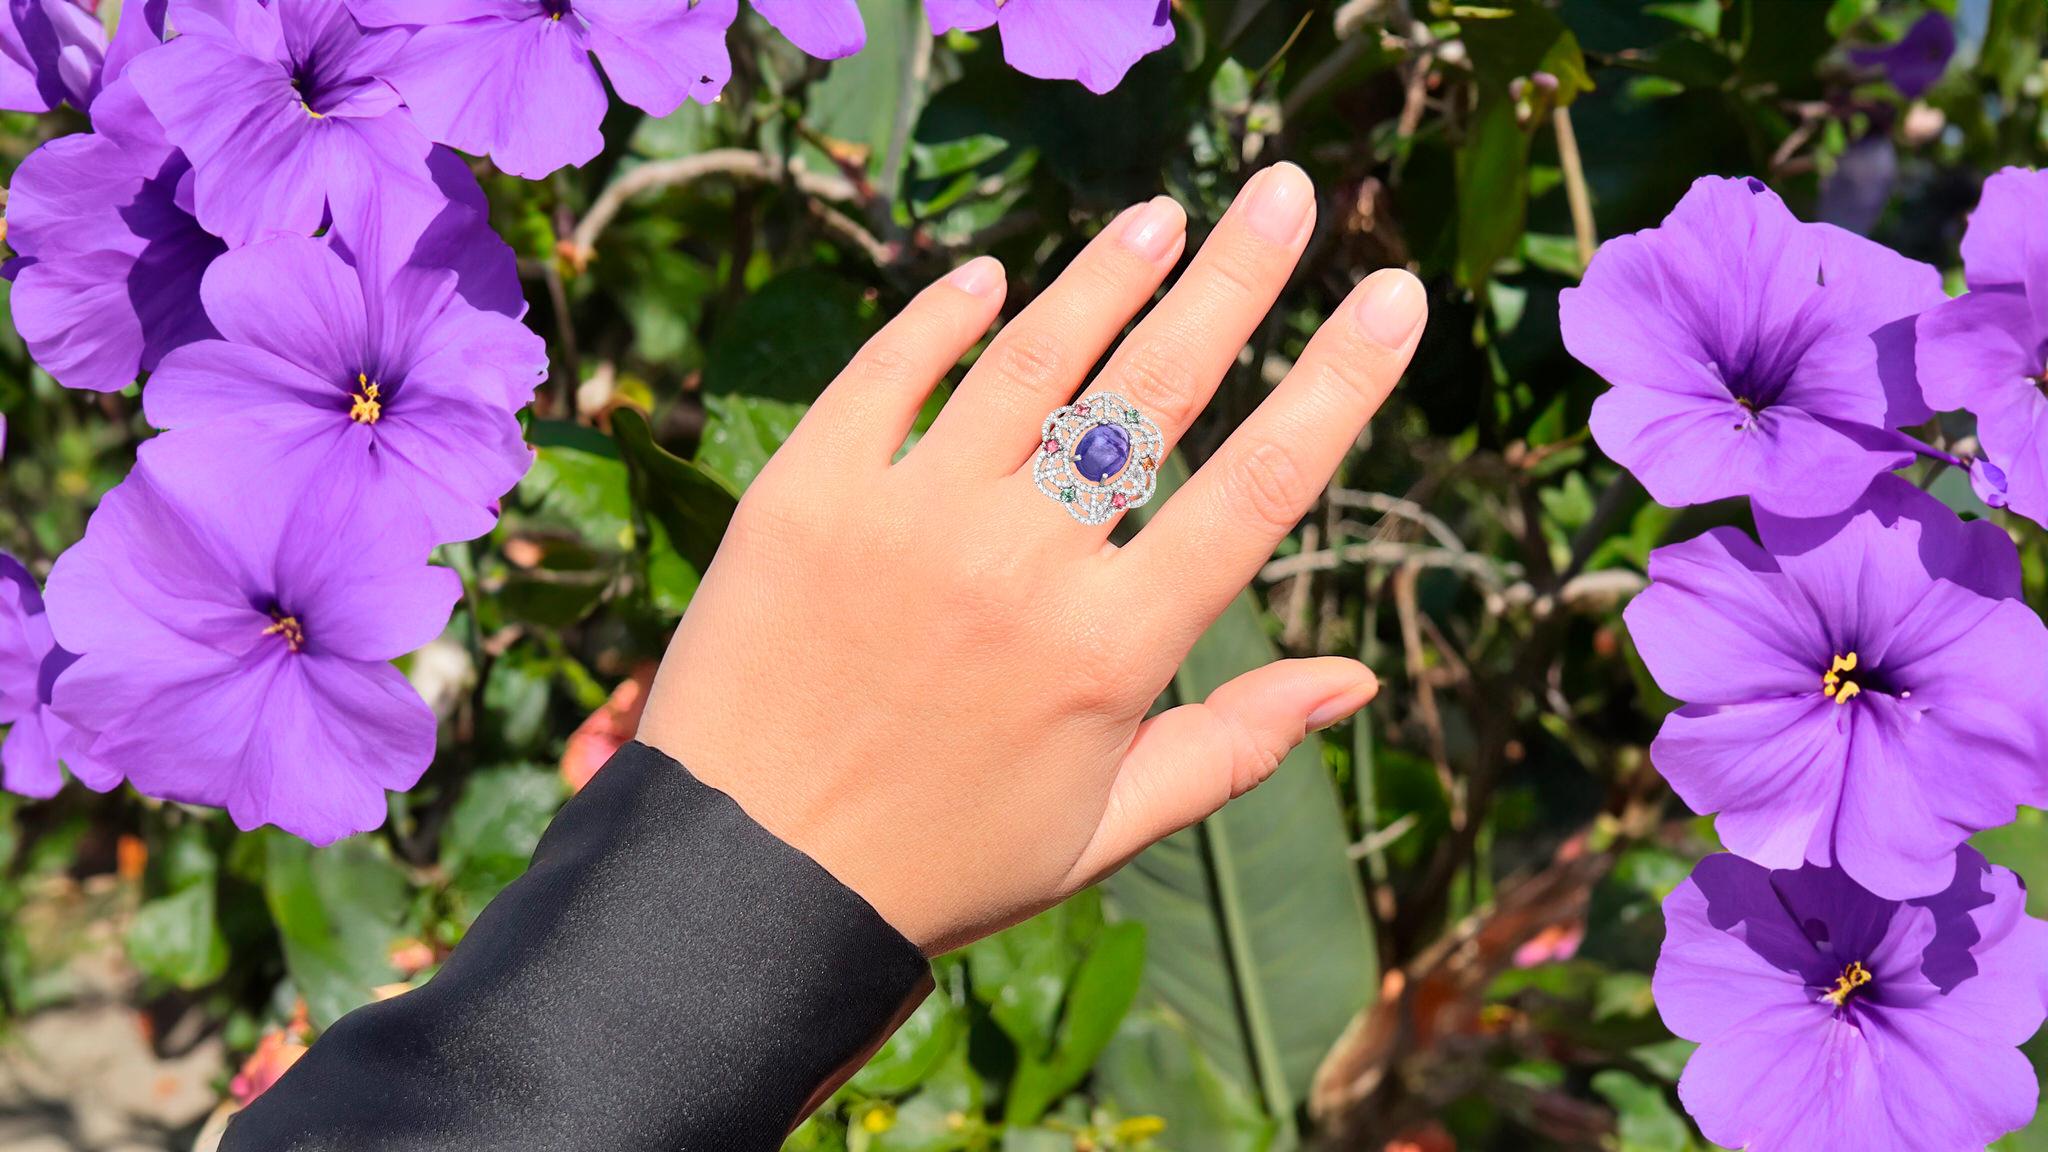 It comes with the Gemological Appraisal by GIA GG/AJP
All Gemstones are Natural
Cabochon Tanzanite = 8.85 Carat
6 Multicolor Sapphires = 0.84 Carats
146 Diamonds = 1.46 Carats
Metal: Black Rhodium Plated Sterling Silver
Ring Size: 7.25* US
*It can